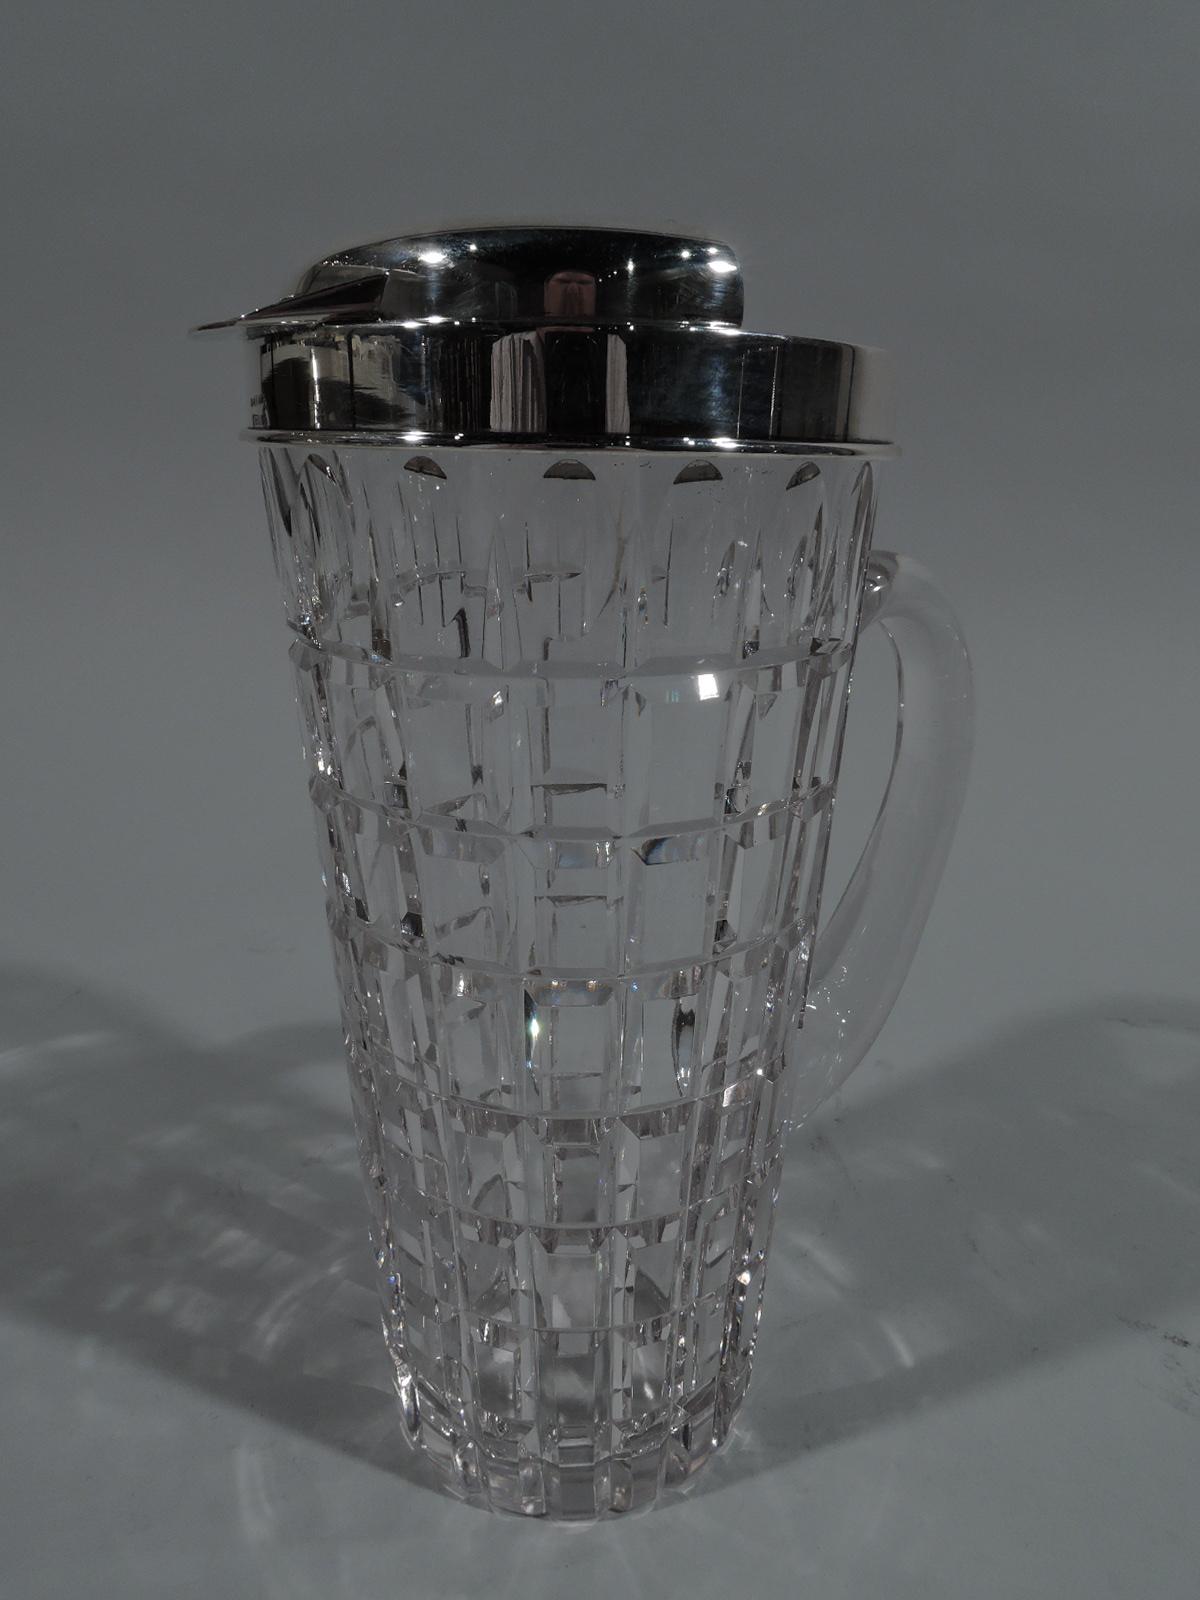 Mid-Century Modern sterling silver and glass bar pitcher. Retailed by Cartier in New York. Clear glass body with straight and tapering sides with c-scroll handle. Sterling silver collar with flat spout and raised ice guard. Faceted rectilinear grid